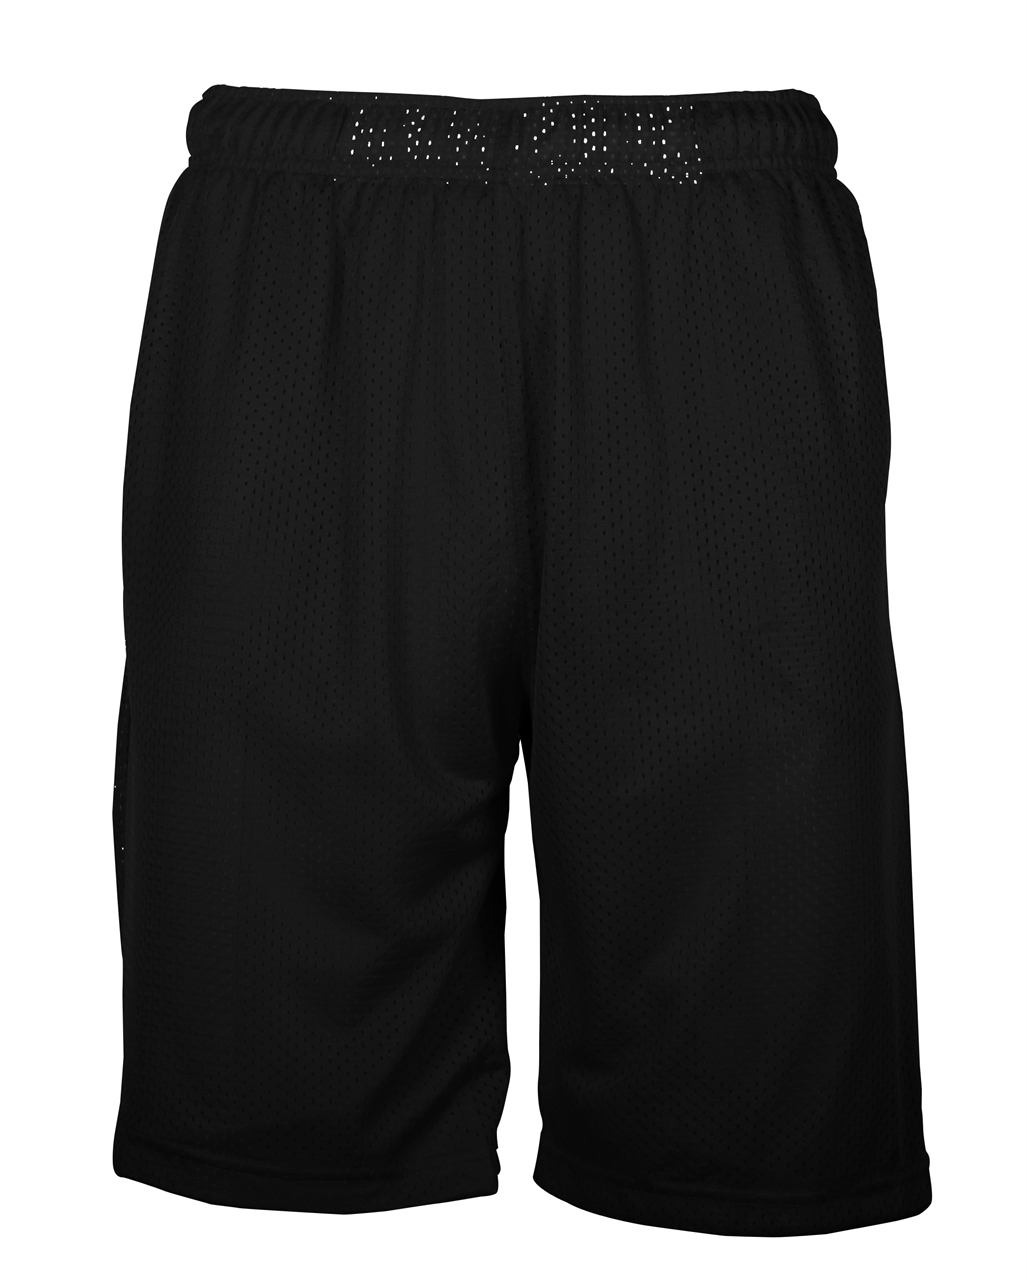 Picture of N3 Sport Mesh Youth Short